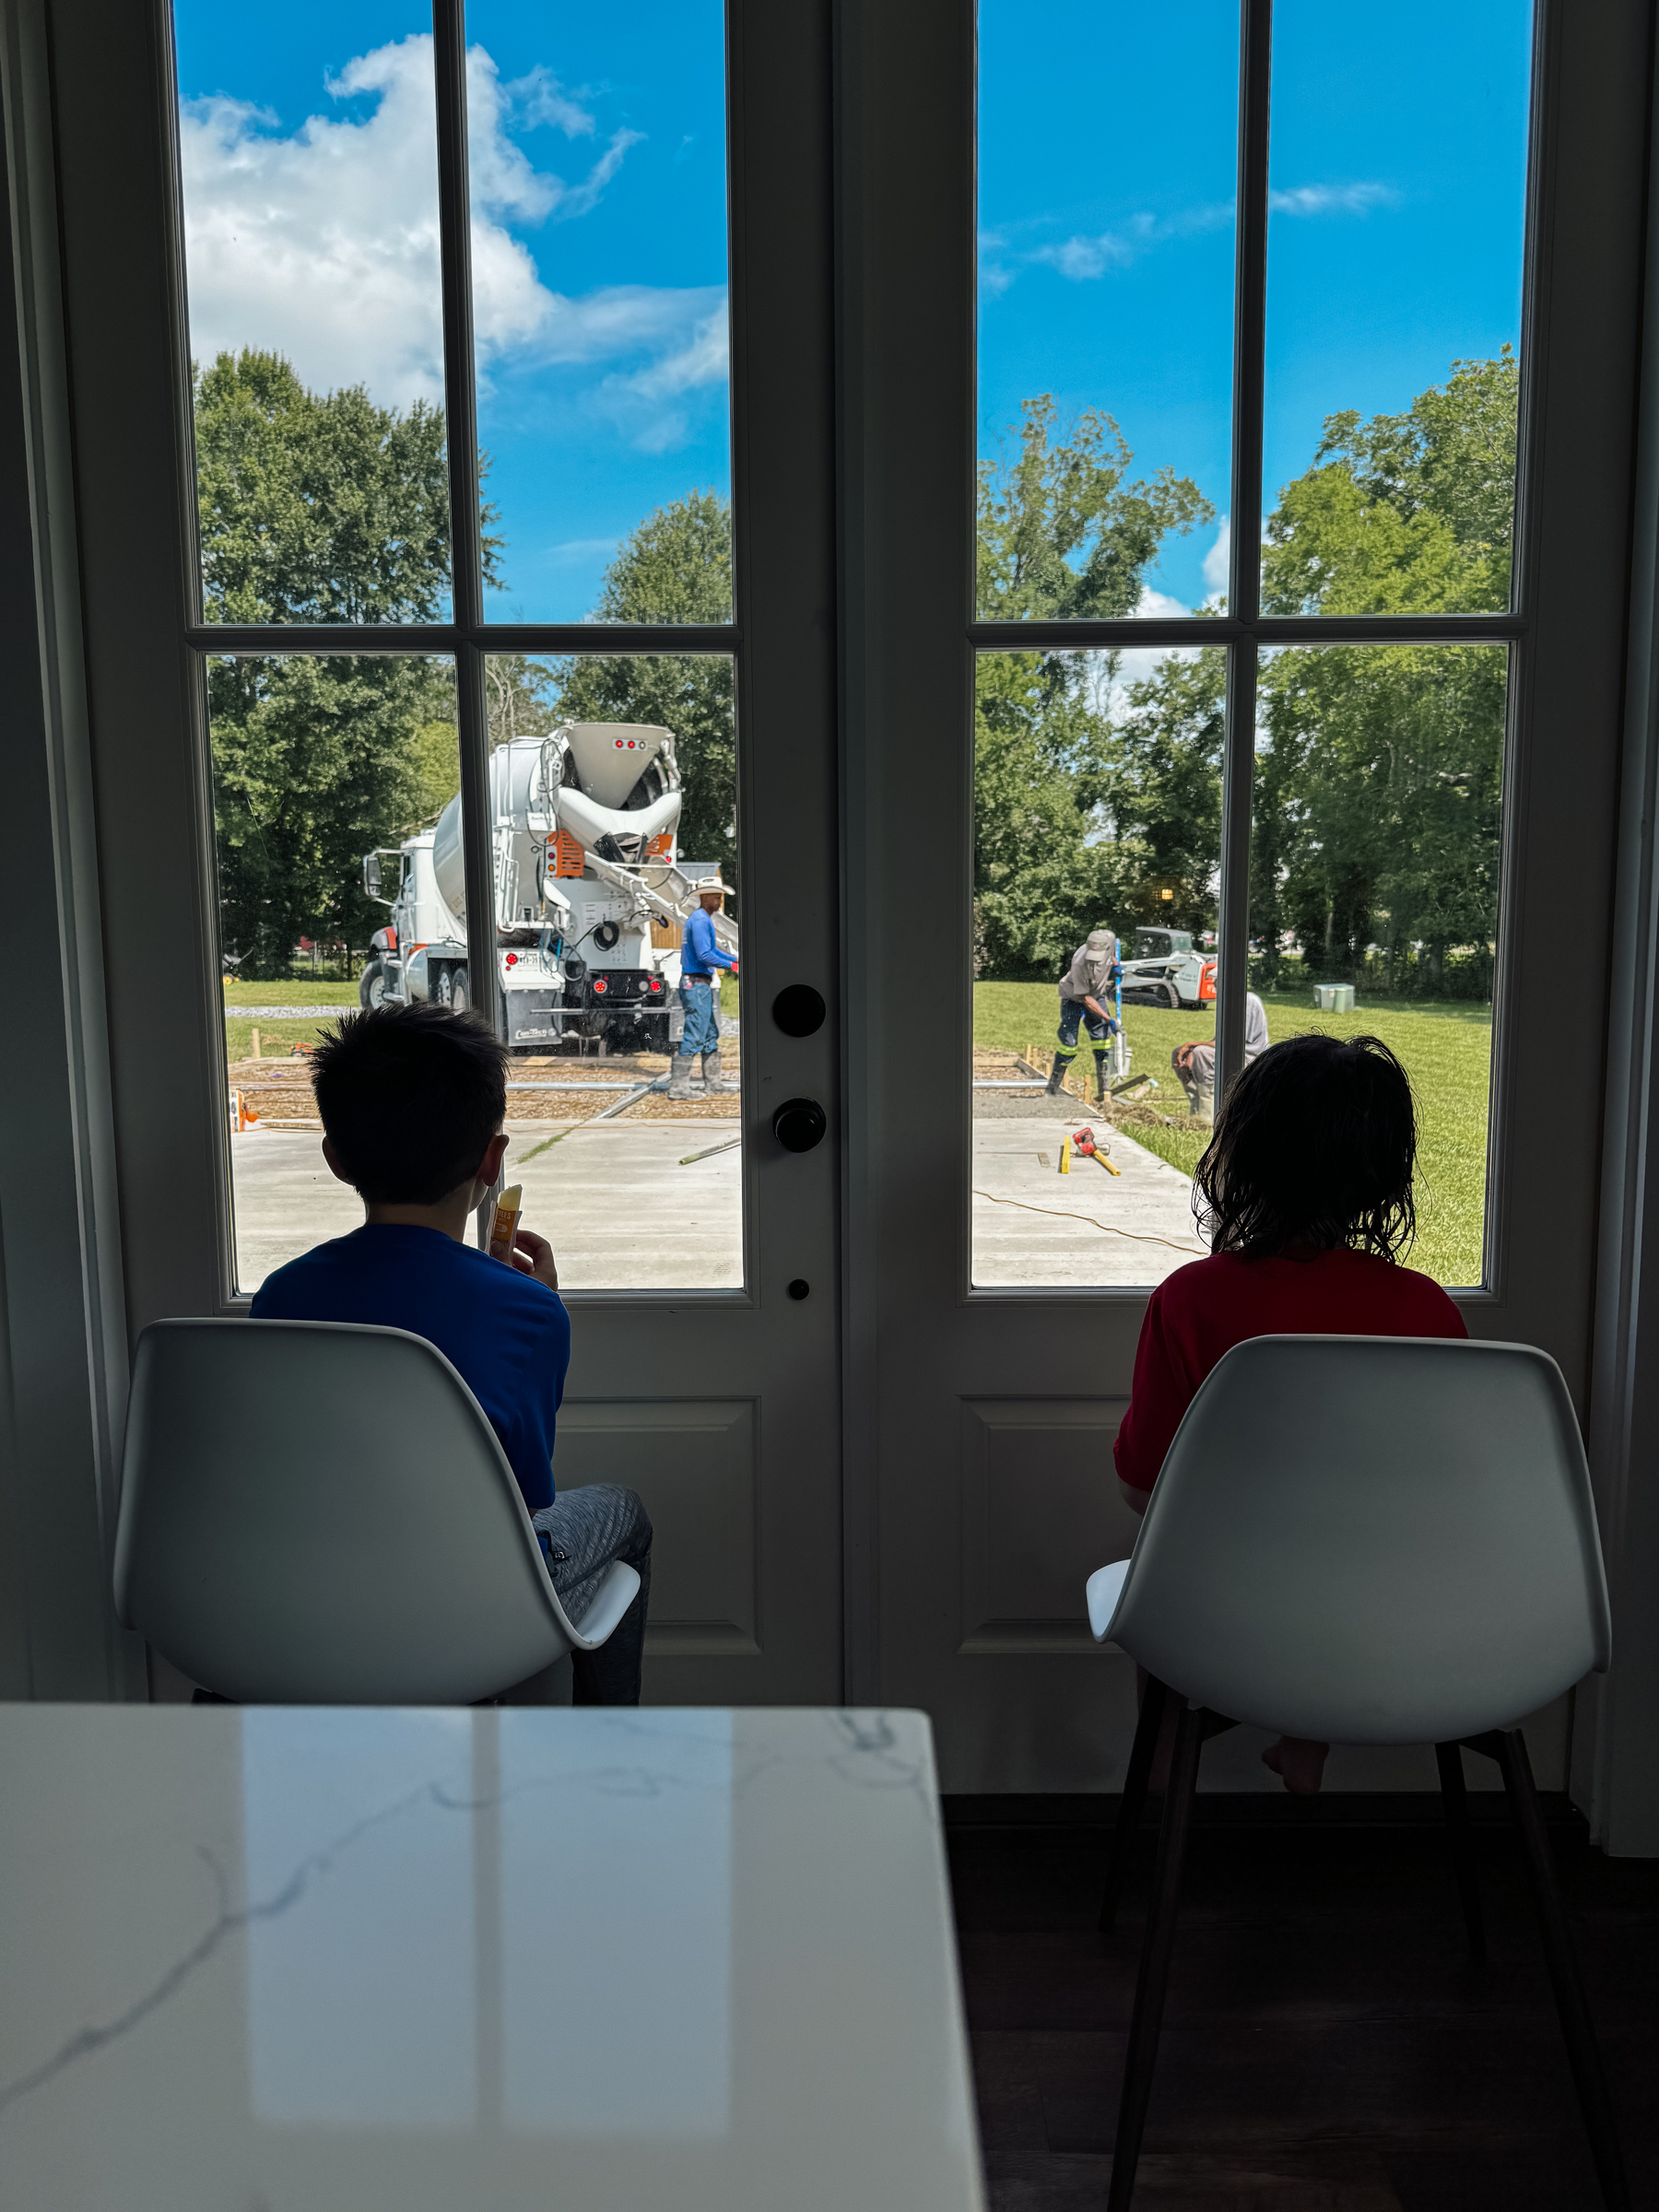 Two kids sitting in chairs in front of a window watching a concrete mixer pour concrete and men work to make it a slab for a porch